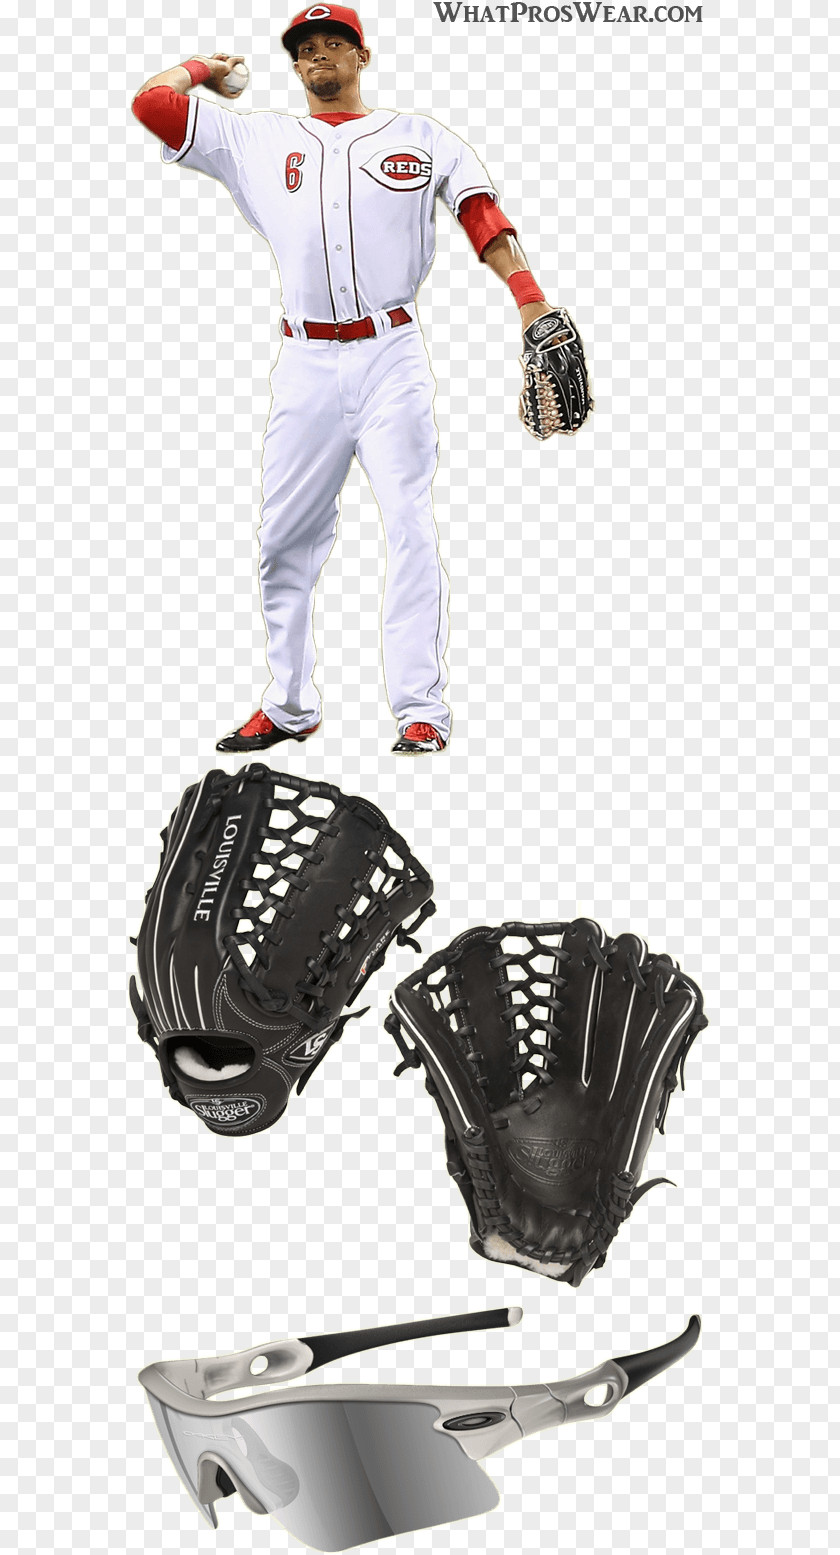 Baseball Protective Gear In Sports Glove Outfielder Hillerich & Bradsby PNG